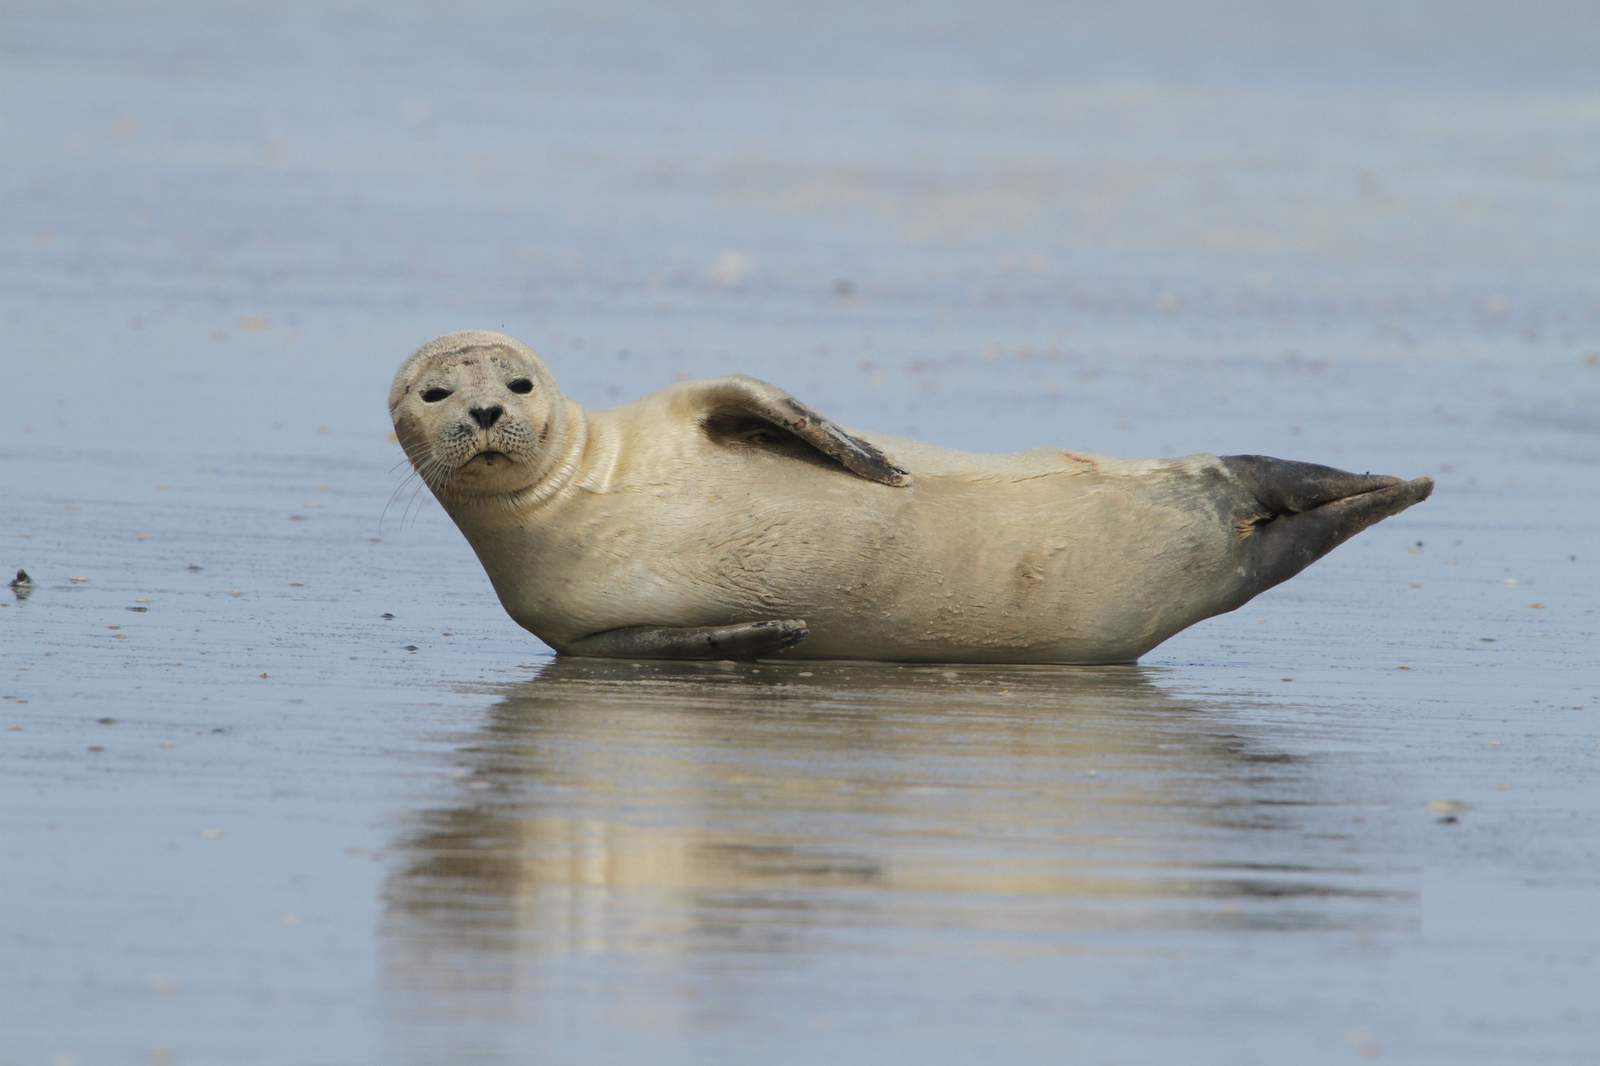 Seal spotted bouncing around on North Florida beaches